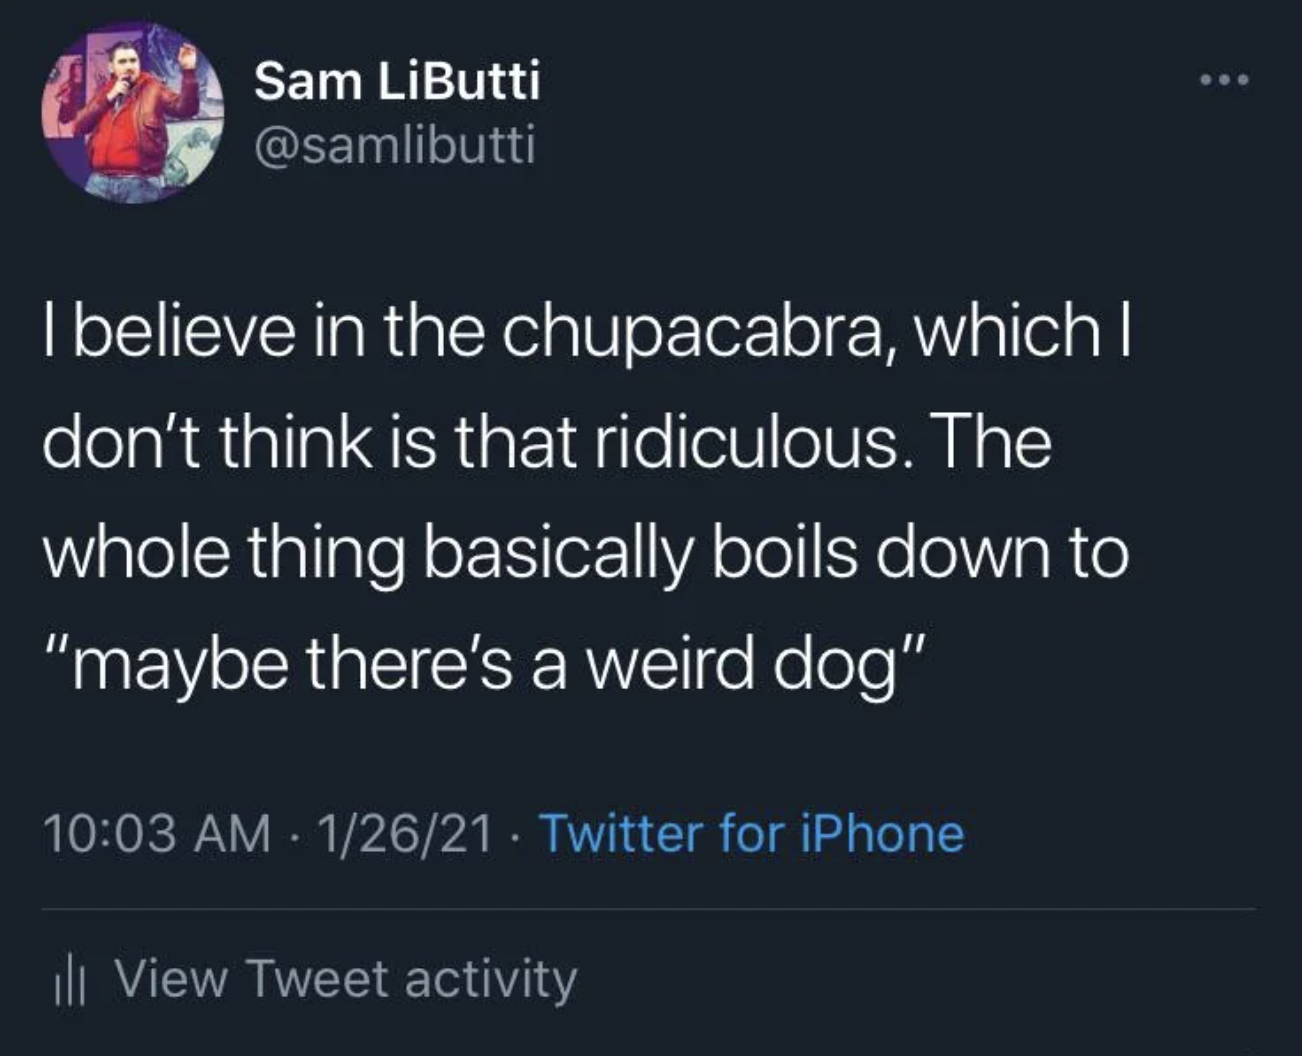 screenshot - Sam LiButti I believe in the chupacabra, which I don't think is that ridiculous. The whole thing basically boils down to "maybe there's a weird dog" 12621. Twitter for iPhone ill View Tweet activity